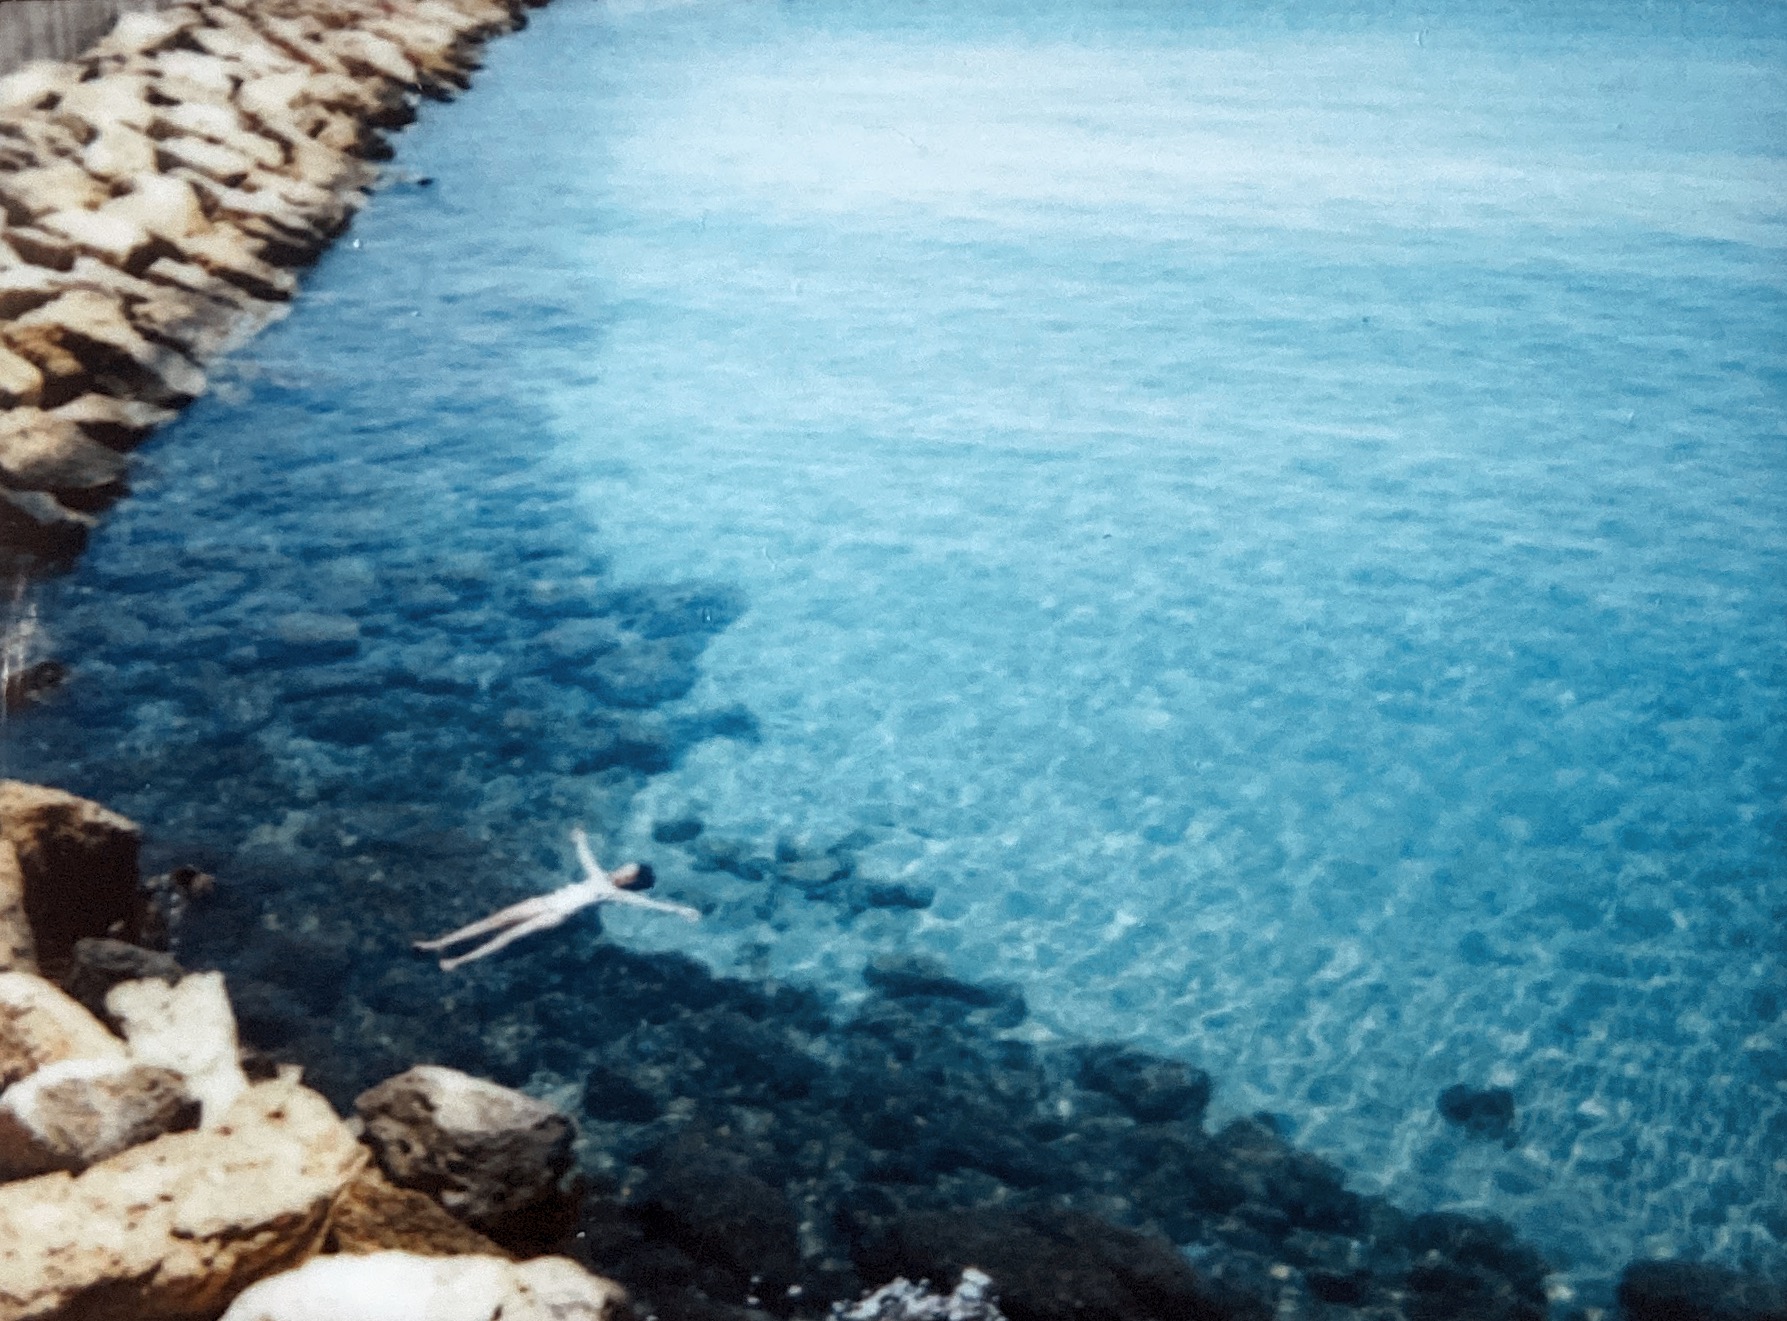 Shake it like a polaroid picture. This is my favourite instant pic that I’ve taken. I love the sea. The woman floating on her back was modelling for someone else but I got a sneaky little pic! The blue of that sea is magical. Javea/Xabia, Spain (August 2018) Taken with an Instax mini 70 on Fujifilm • View from @calabandida restaurant • Converted from analogue to digital using @photomyne app •